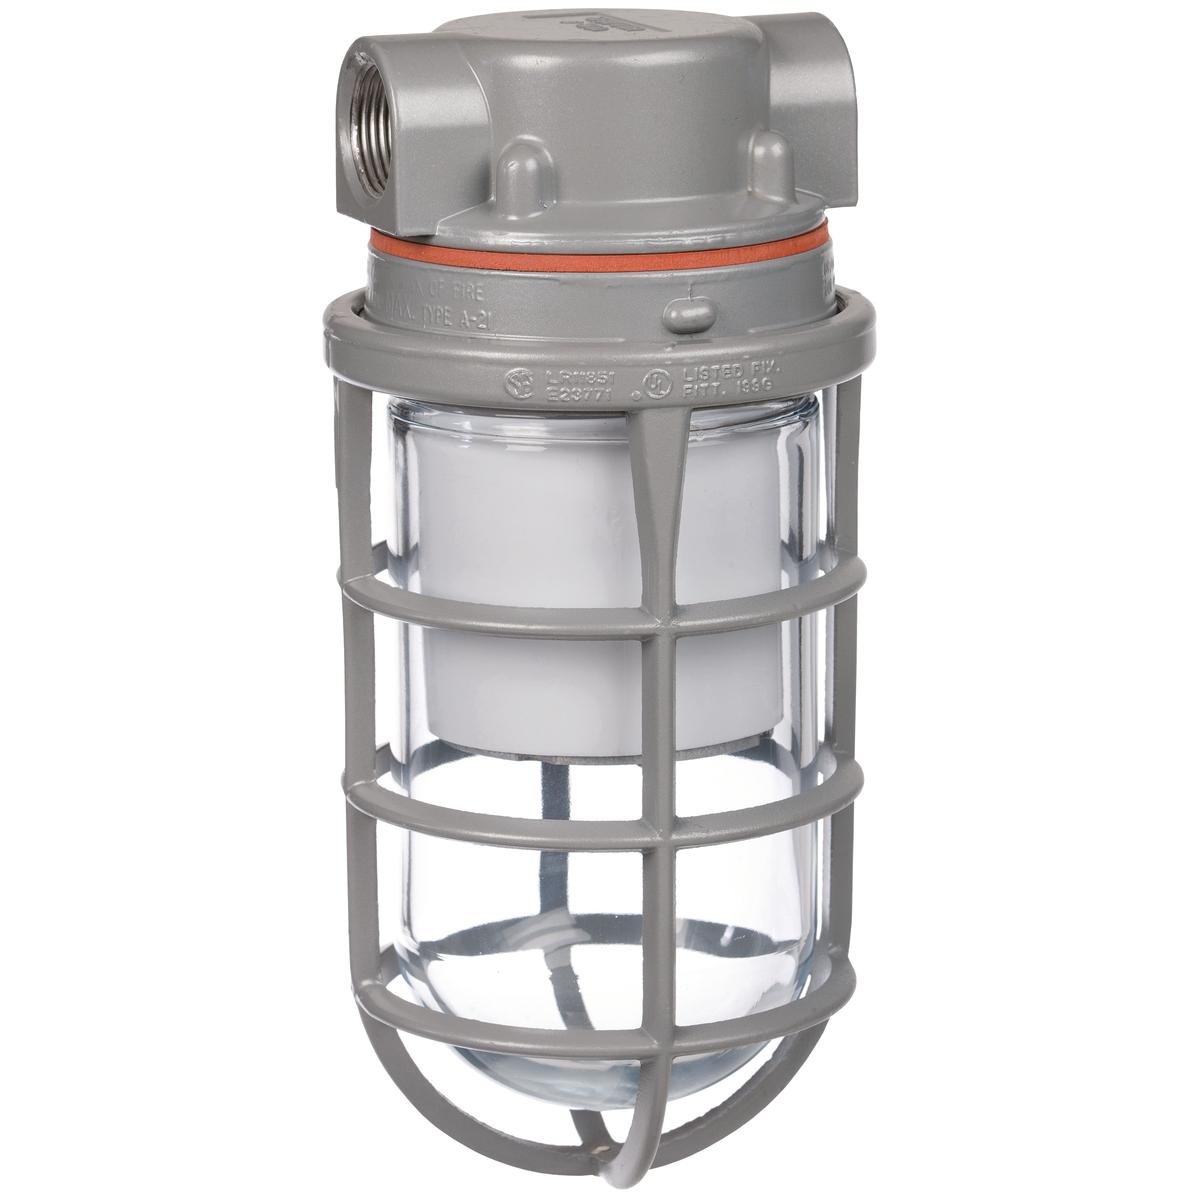 Hubbell VSL1330C1SG The VSL Series is a Vapor Tight/ Utility fixture using energy efficient LED's. This fixture is made with a cast copper-free aluminum housing and mount that is  suitable for harsh and hazardous environments. With the design of this fixtures internal heat s